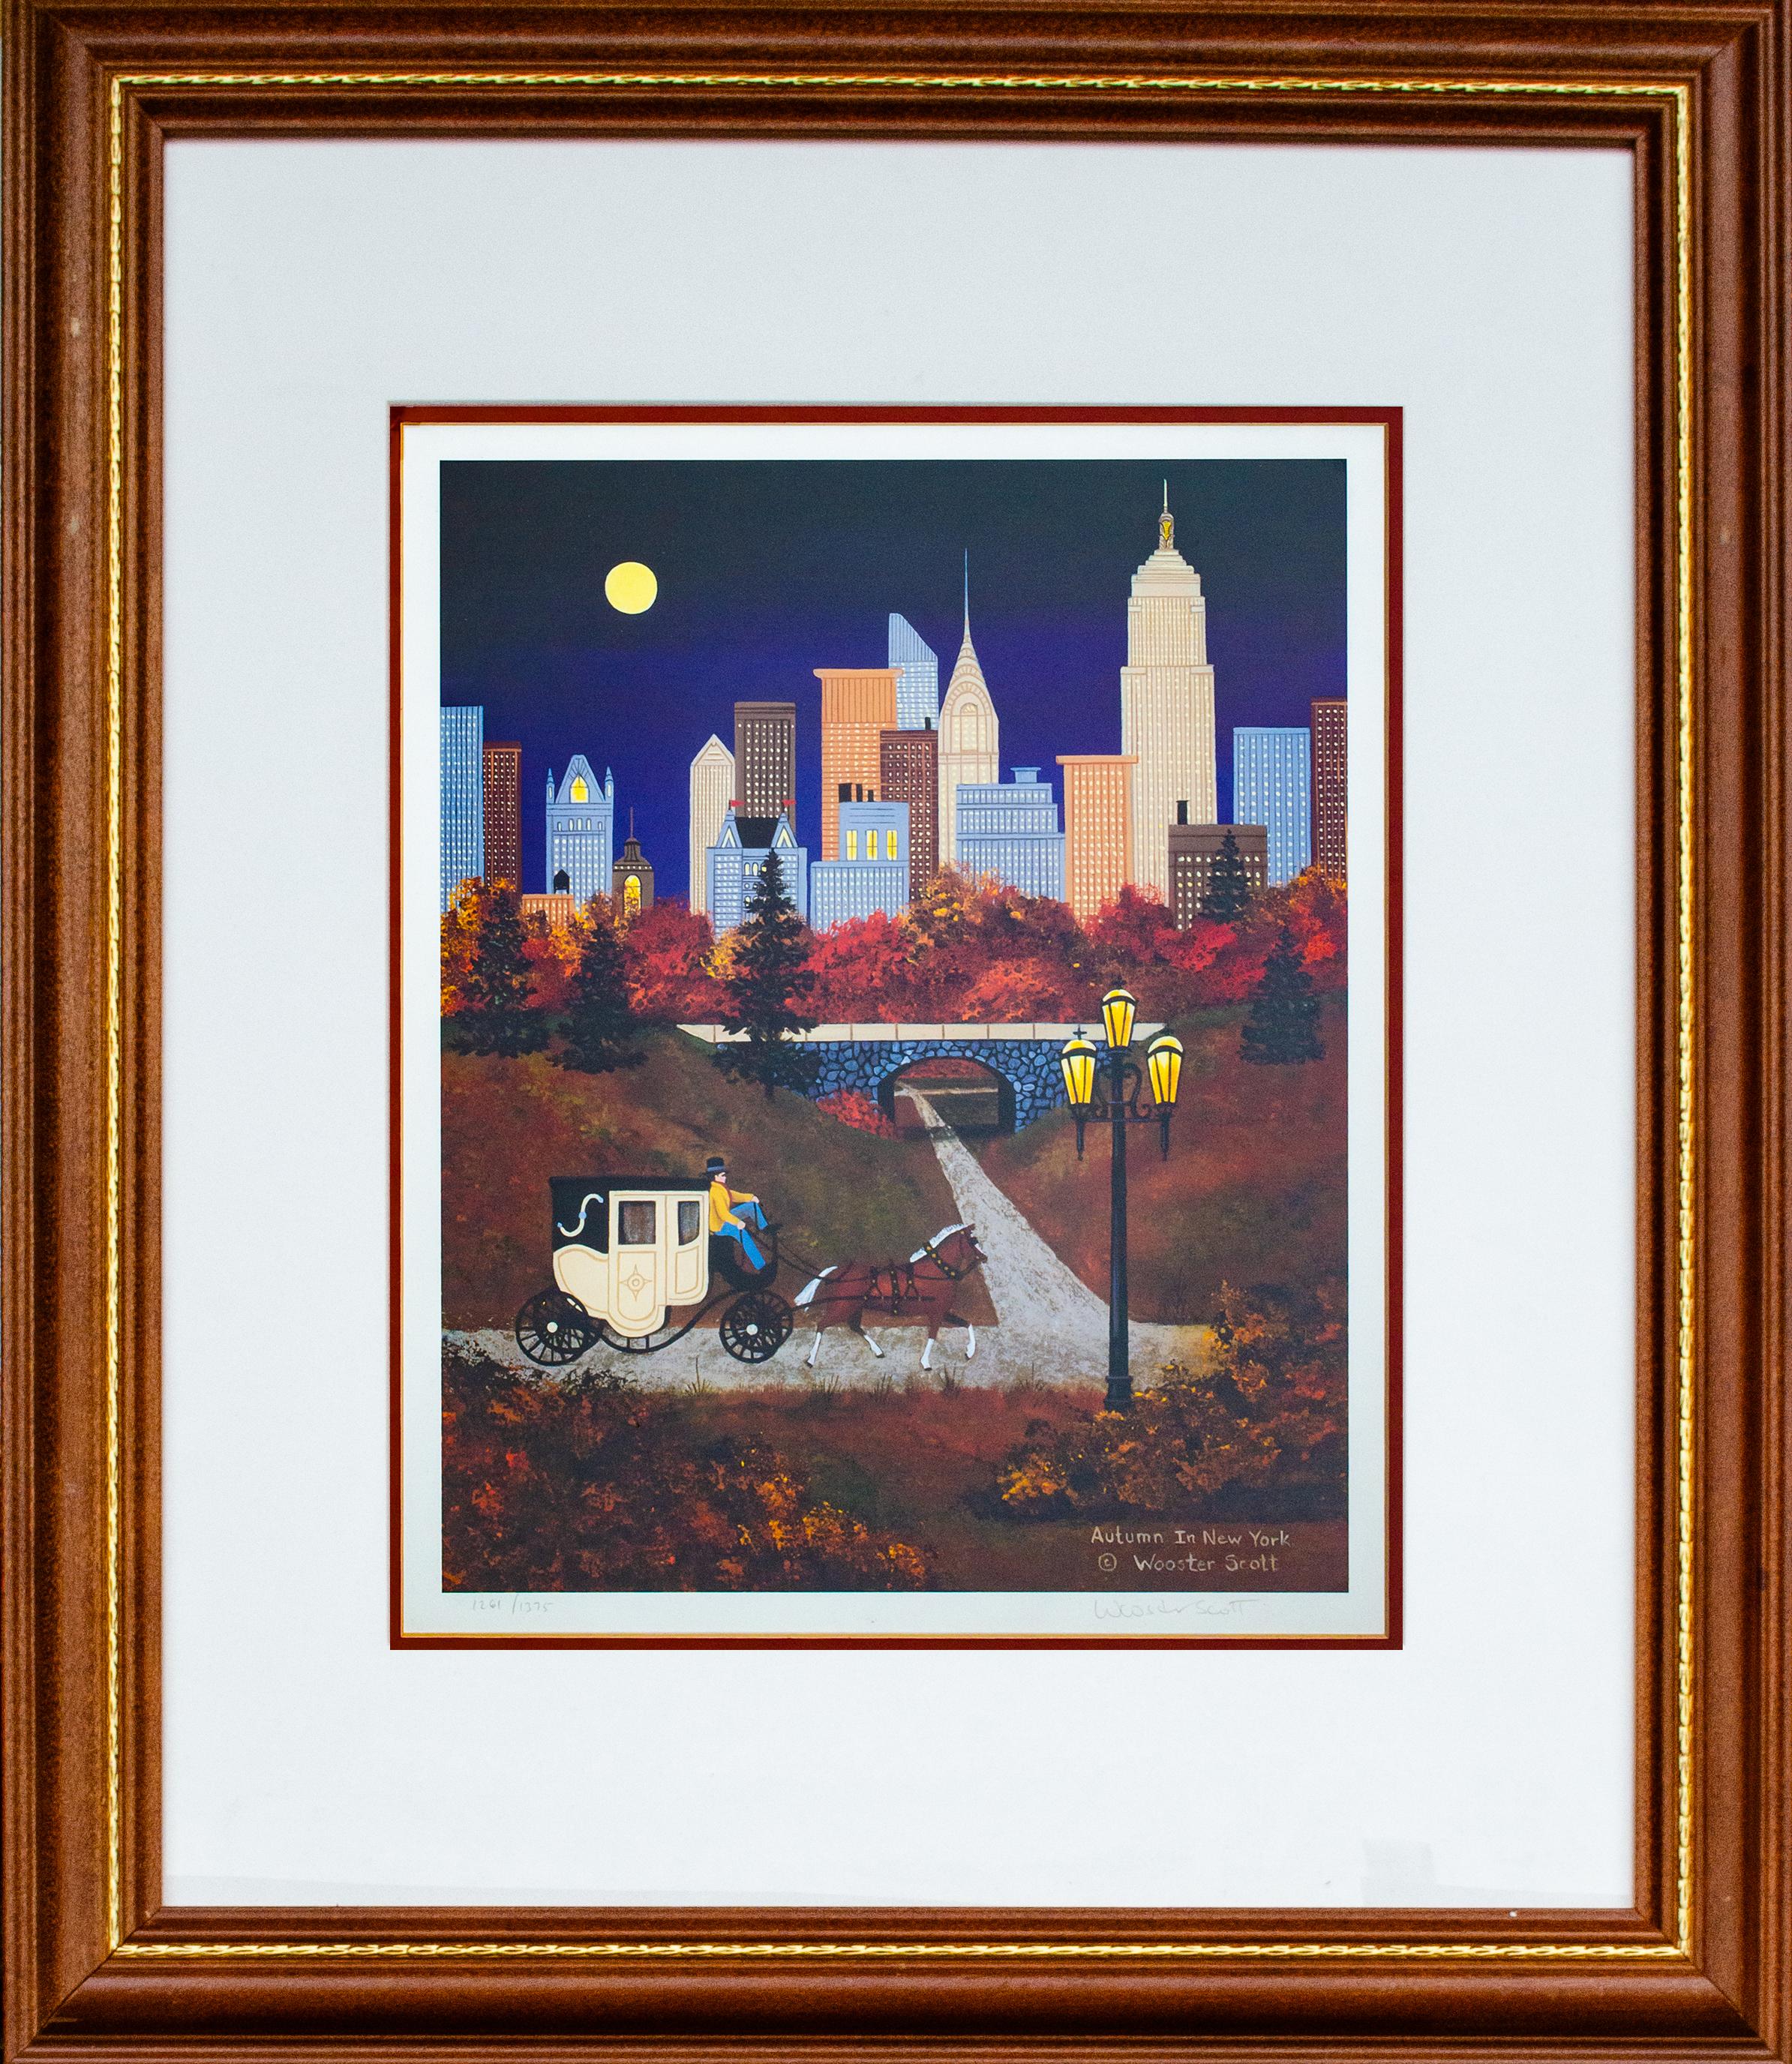 Jane Wooster Scott (American, b. 1920)
Autumn in New York, c. 20th Century
Lithograph
Sight: 15 x 12 in.
Framed: 27 3/4 x 23 3/4 x 1 in.
Signed and titled lower right in plate: Autumn in New York (c) Wooster Scott
Signed in pencil lower right: